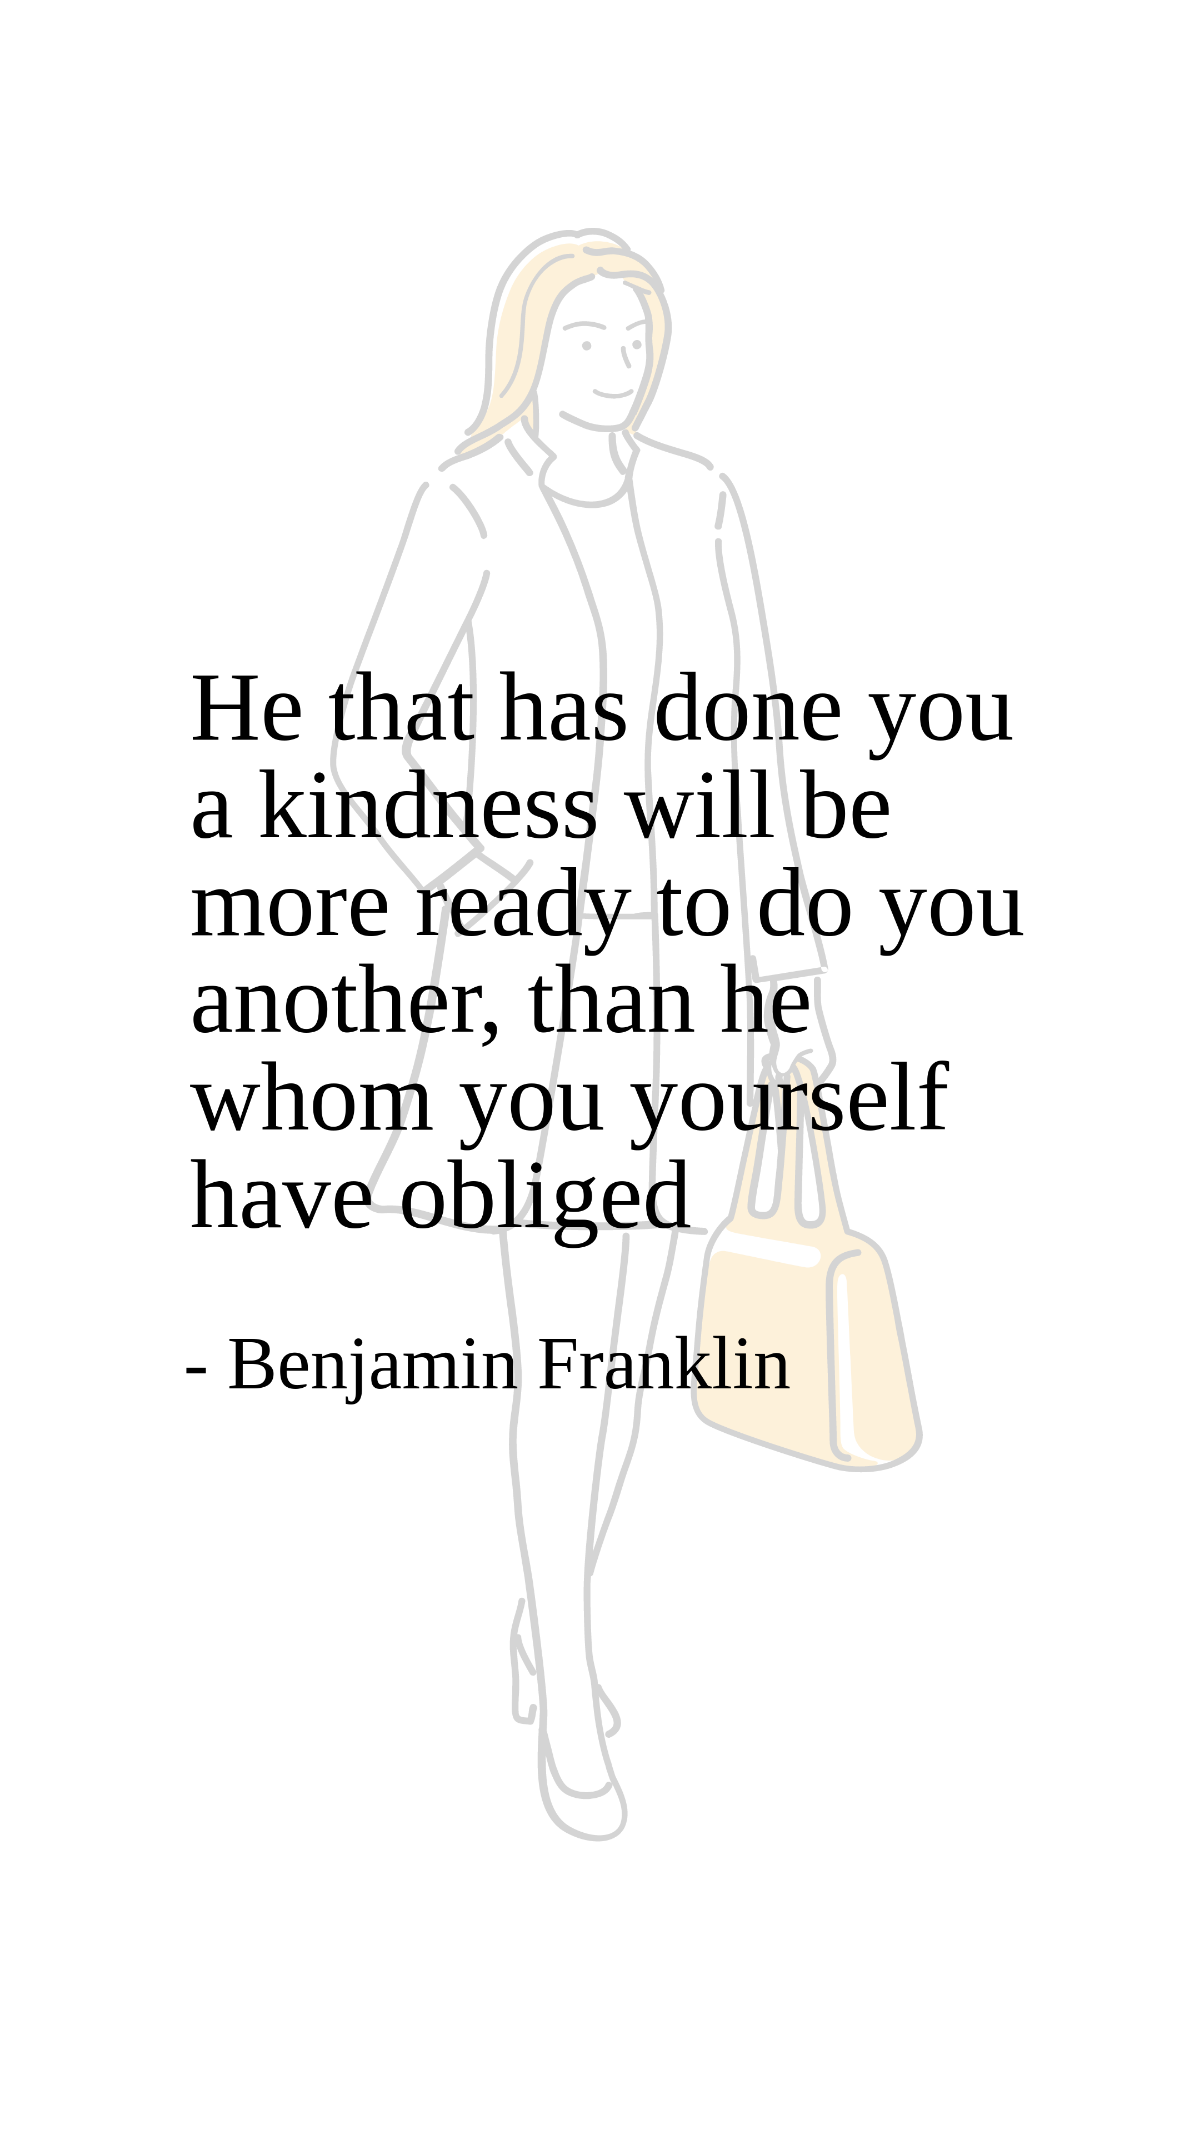 Benjamin Franklin - He that has done you a kindness will be more ready to do you another, than he whom you yourself have obliged Template